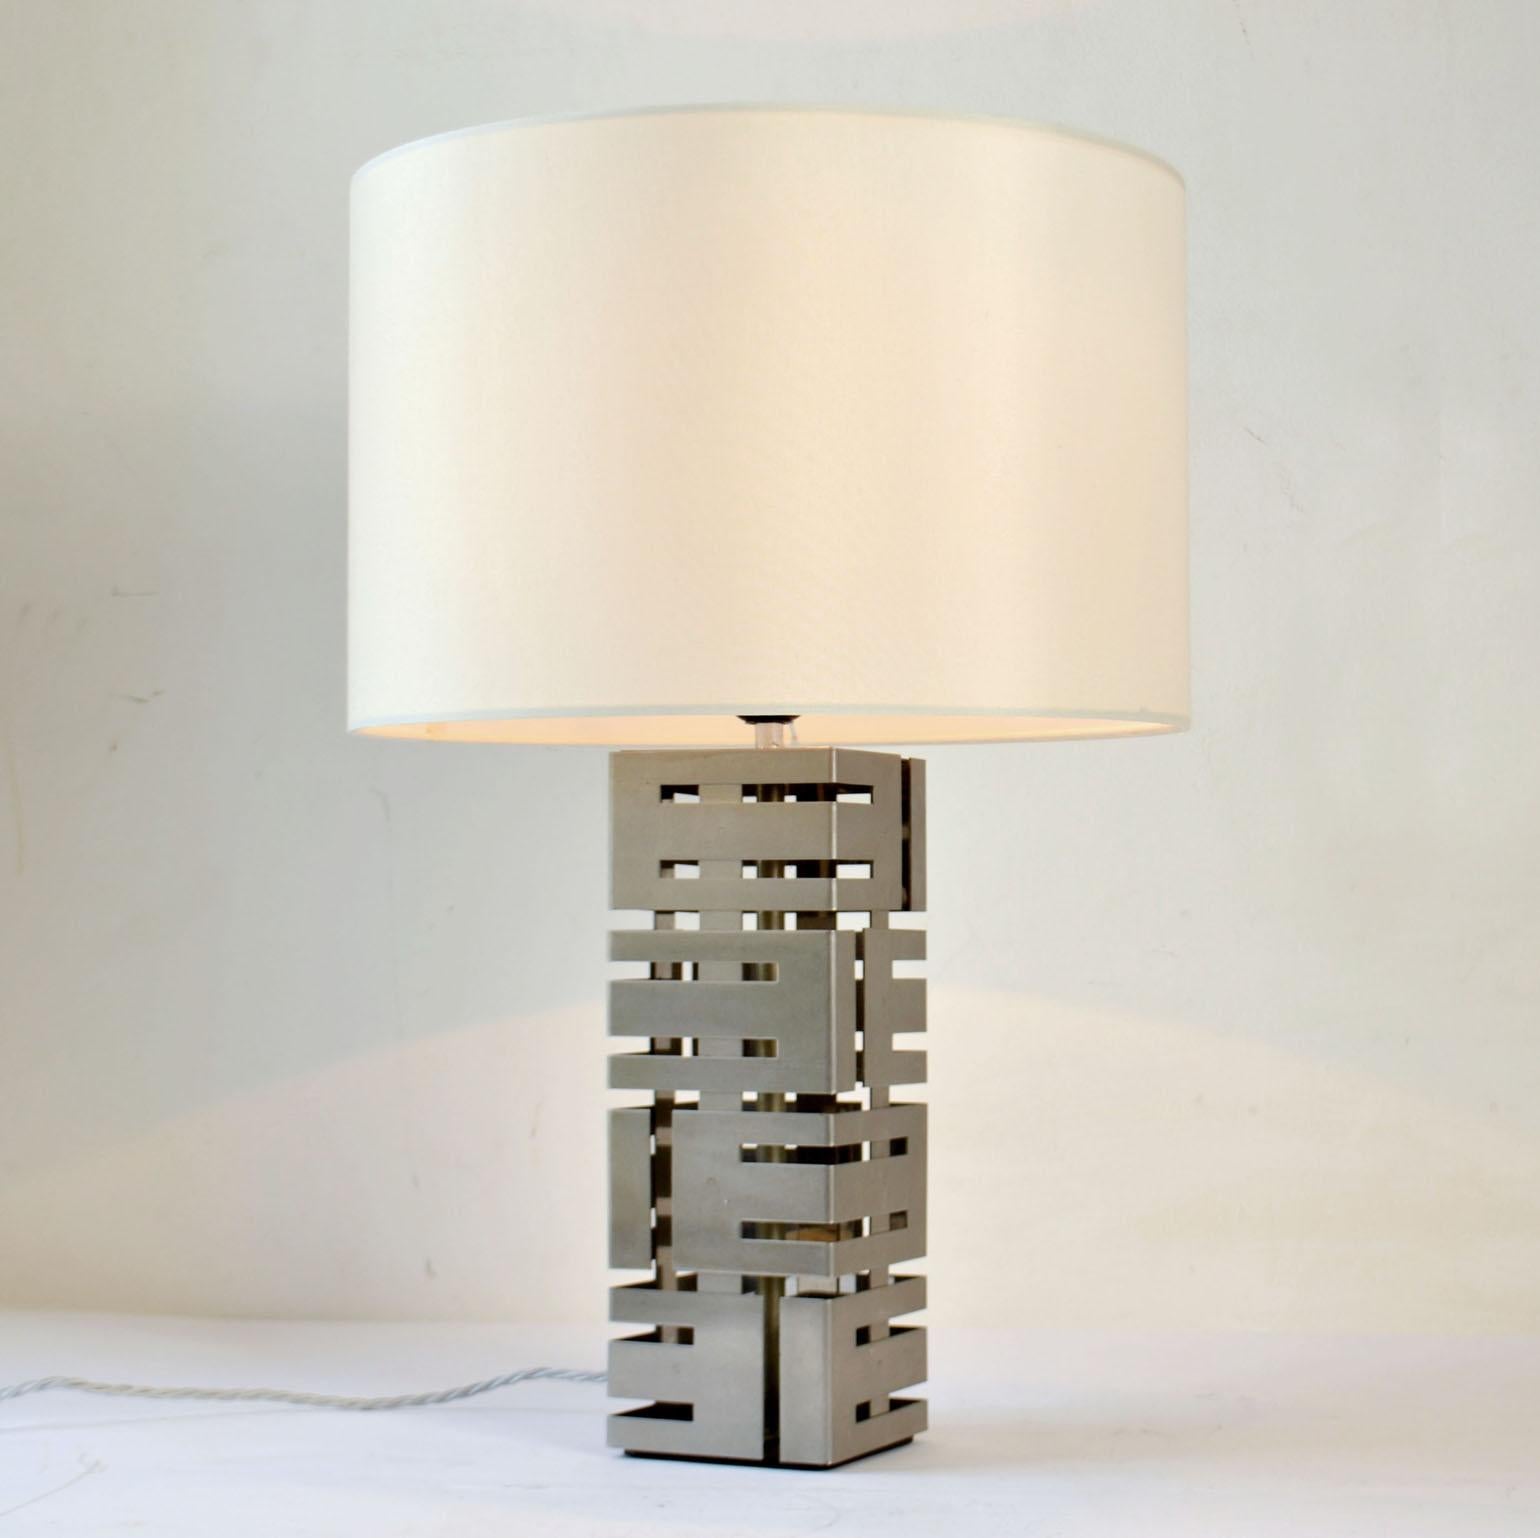 Two Square Stainless Steel Table Lamps by Laurel Company 2